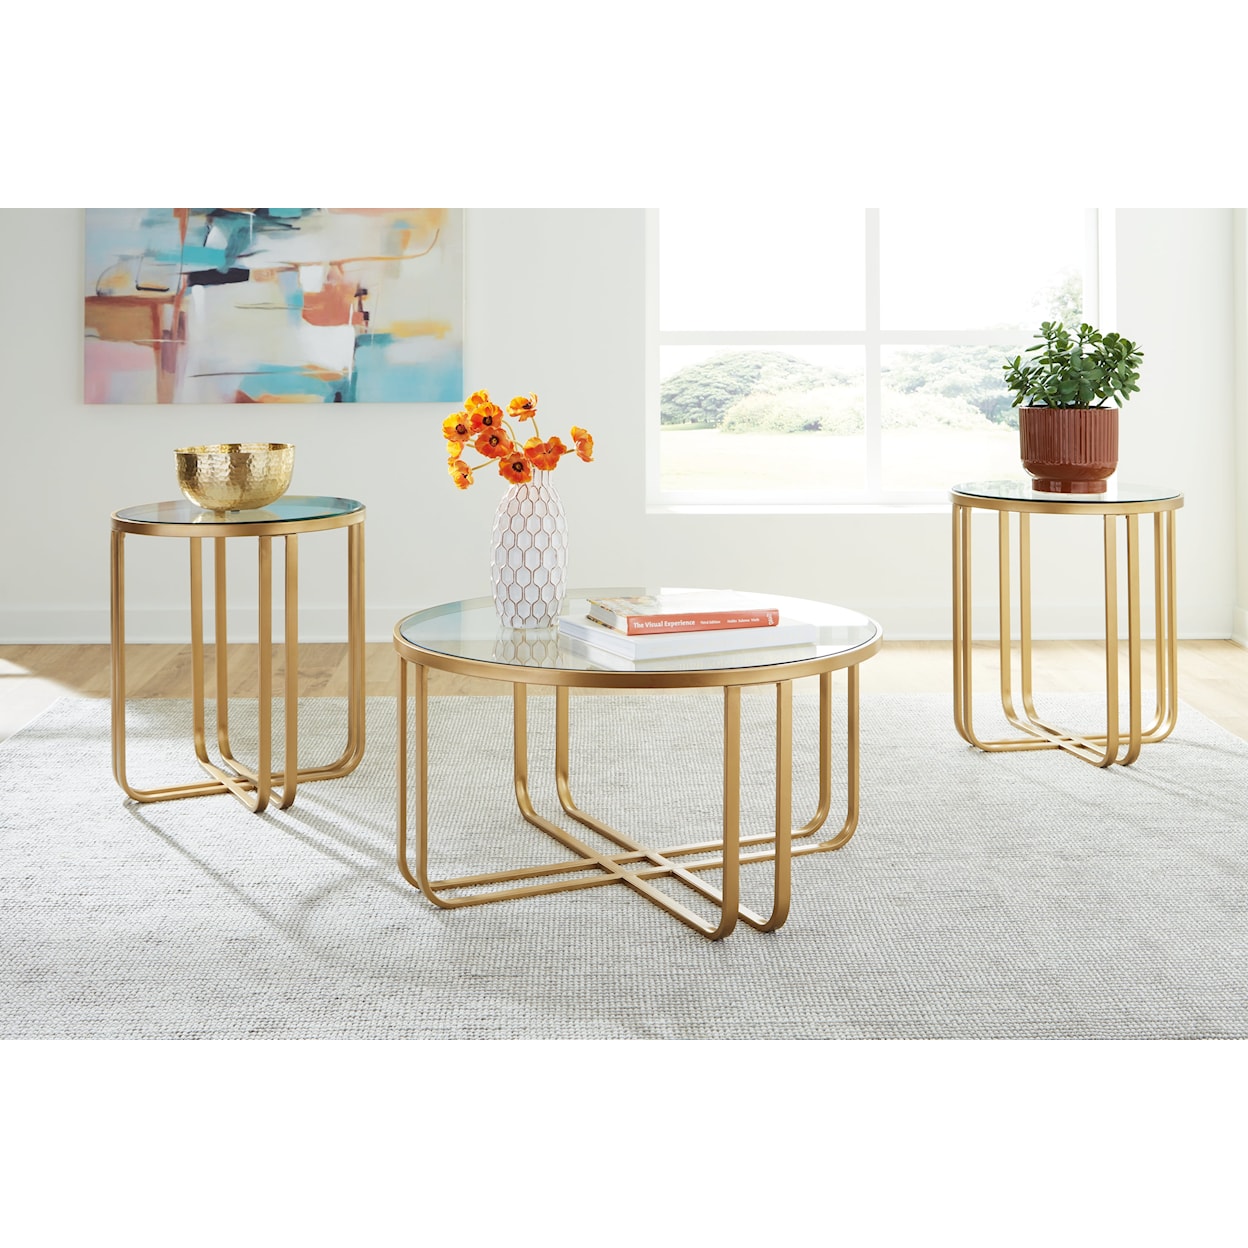 Signature Design by Ashley Furniture Milloton Occasional Table Set